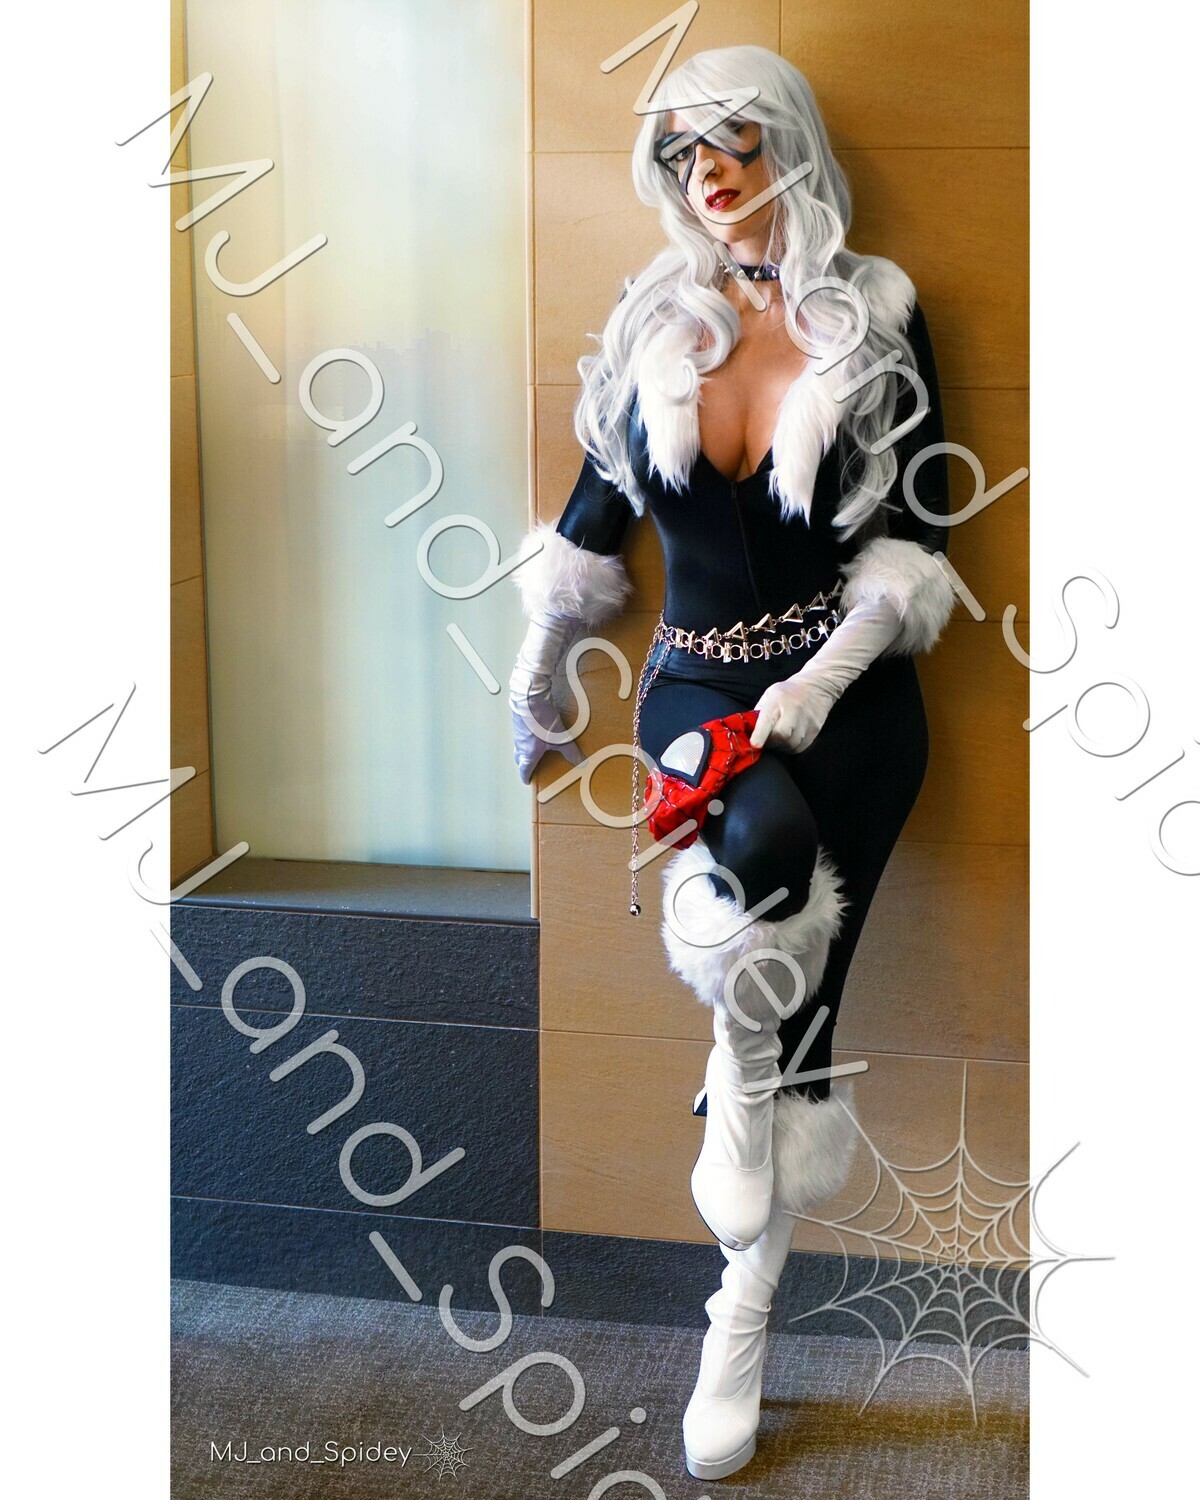 Marvel - Spider-Man - Black Cat - Classic No. 2 - 8x10 Cosplay Print (@MJ_and_Spidey, MJ and Spidey, Comics)